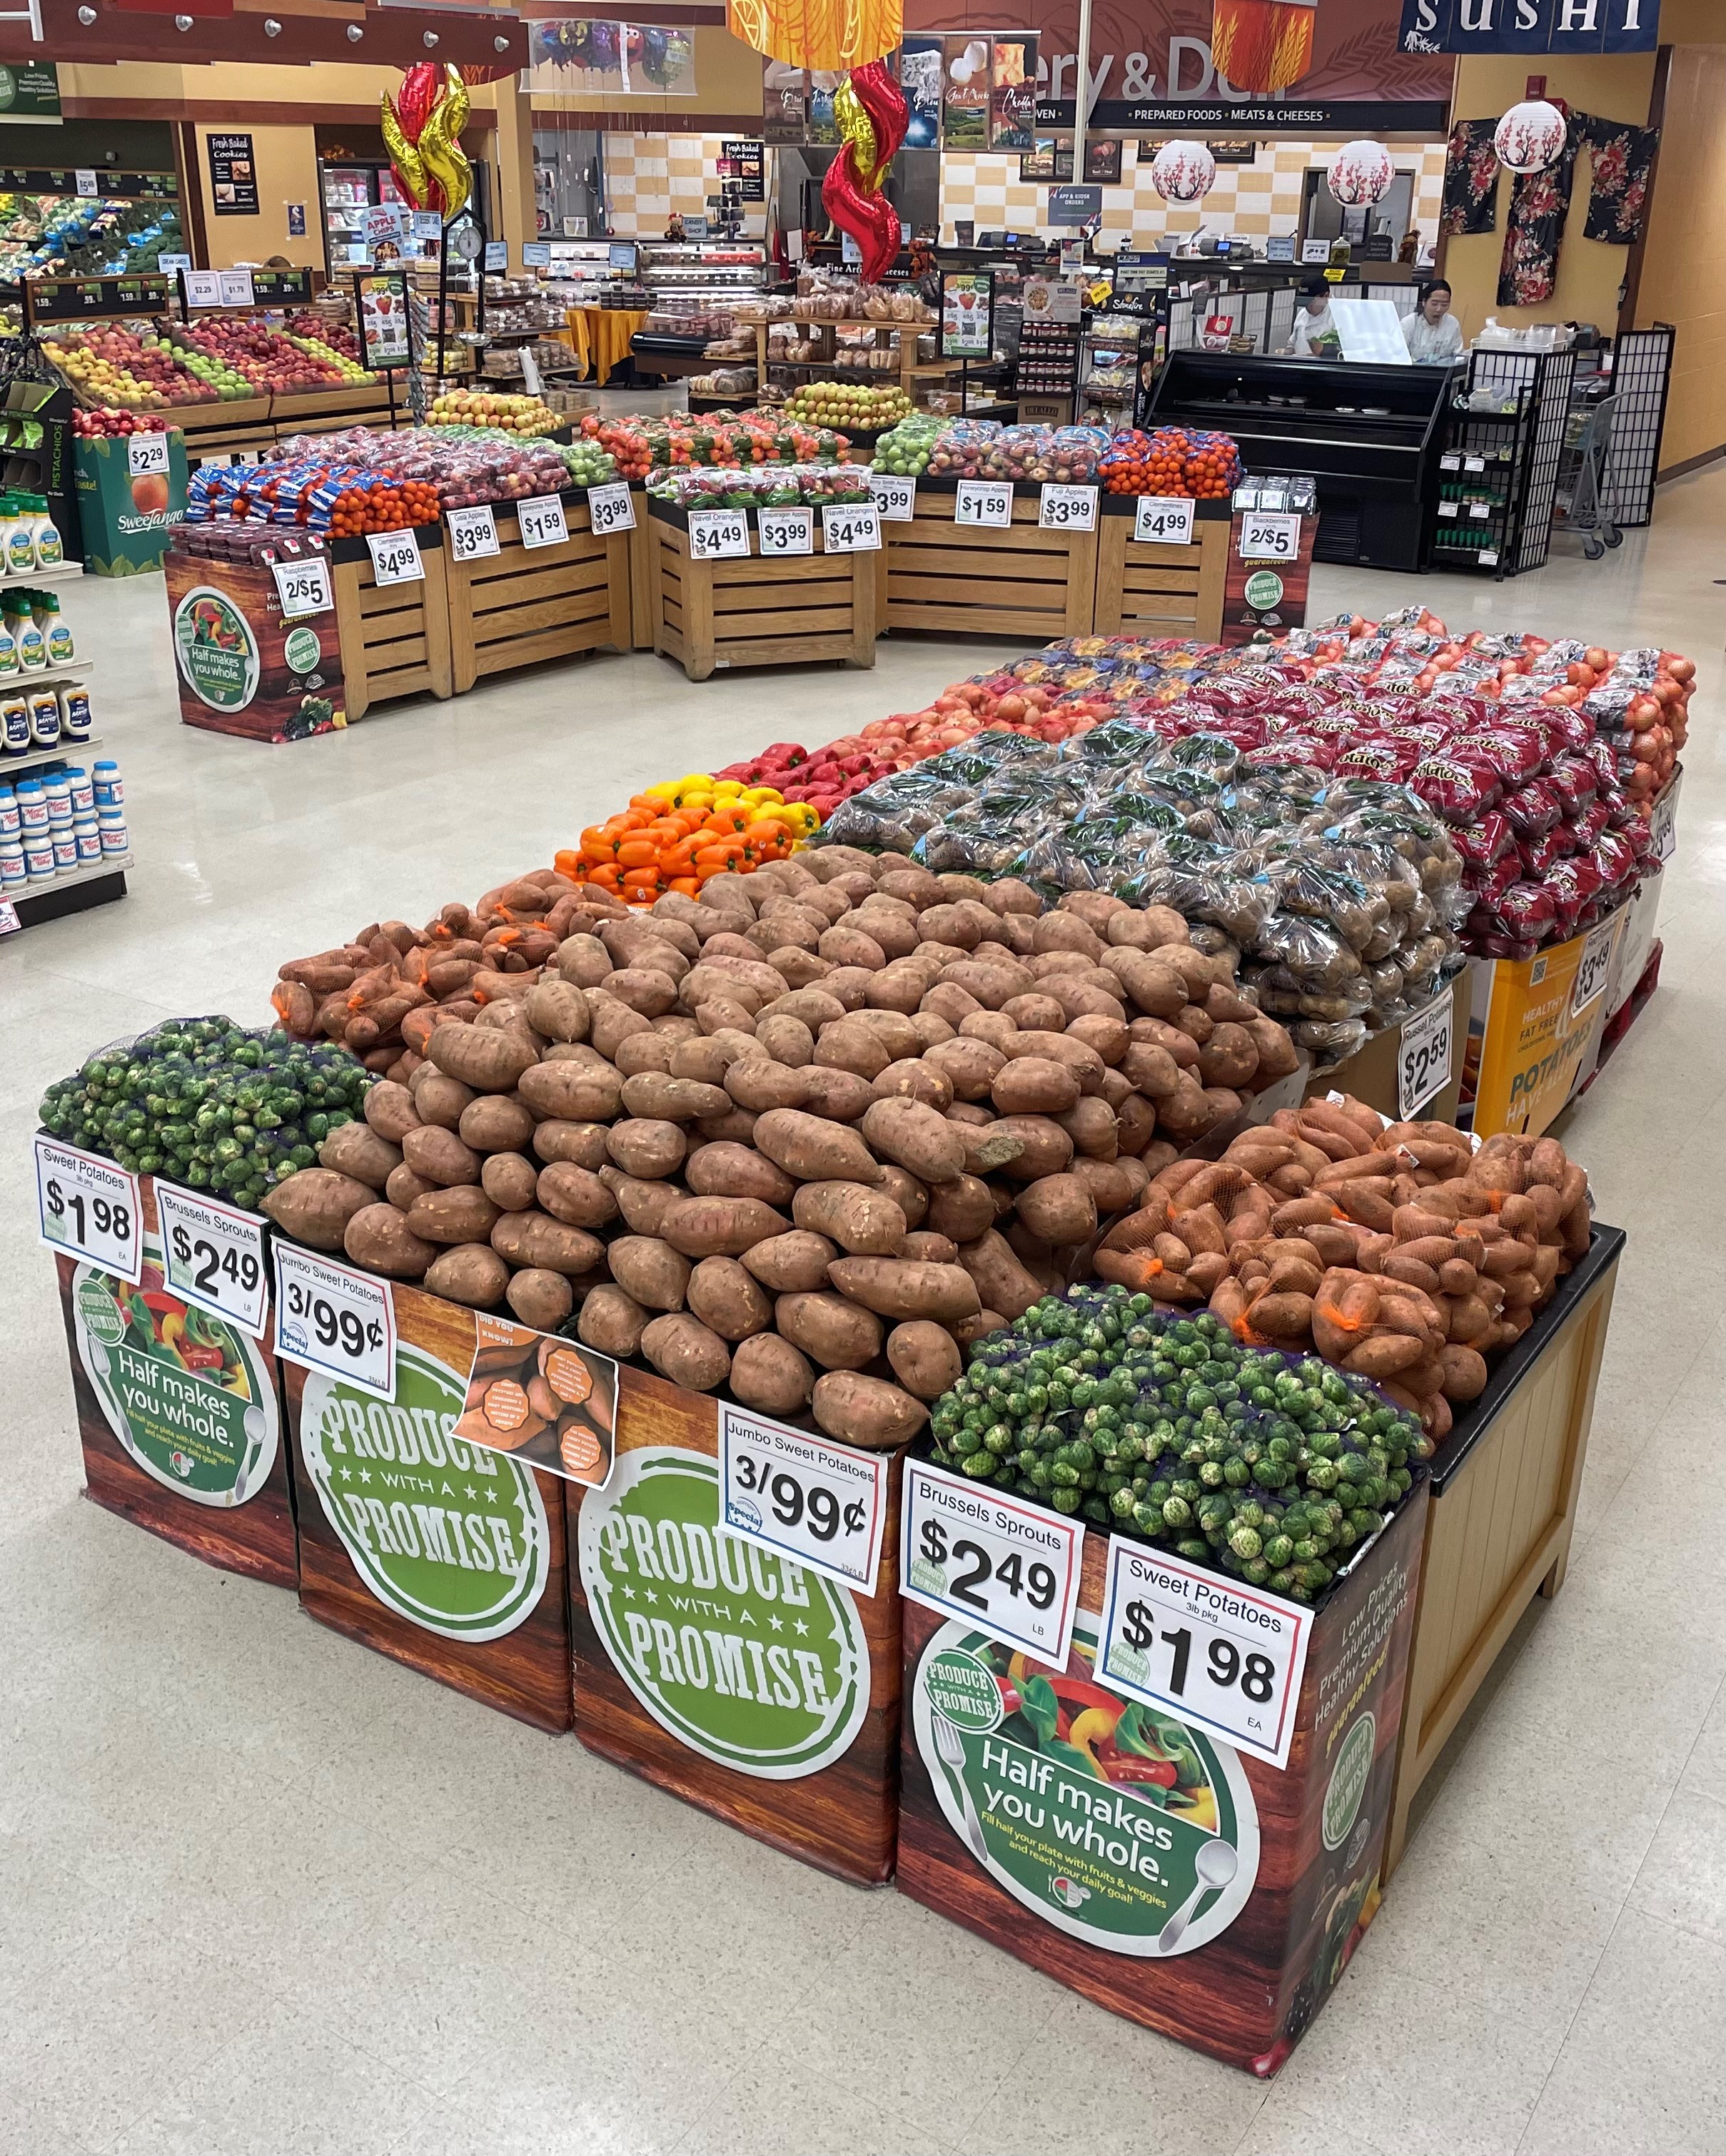 Photo: Courtesy of Stephen Daly at Military Produce Group sweet potatoes